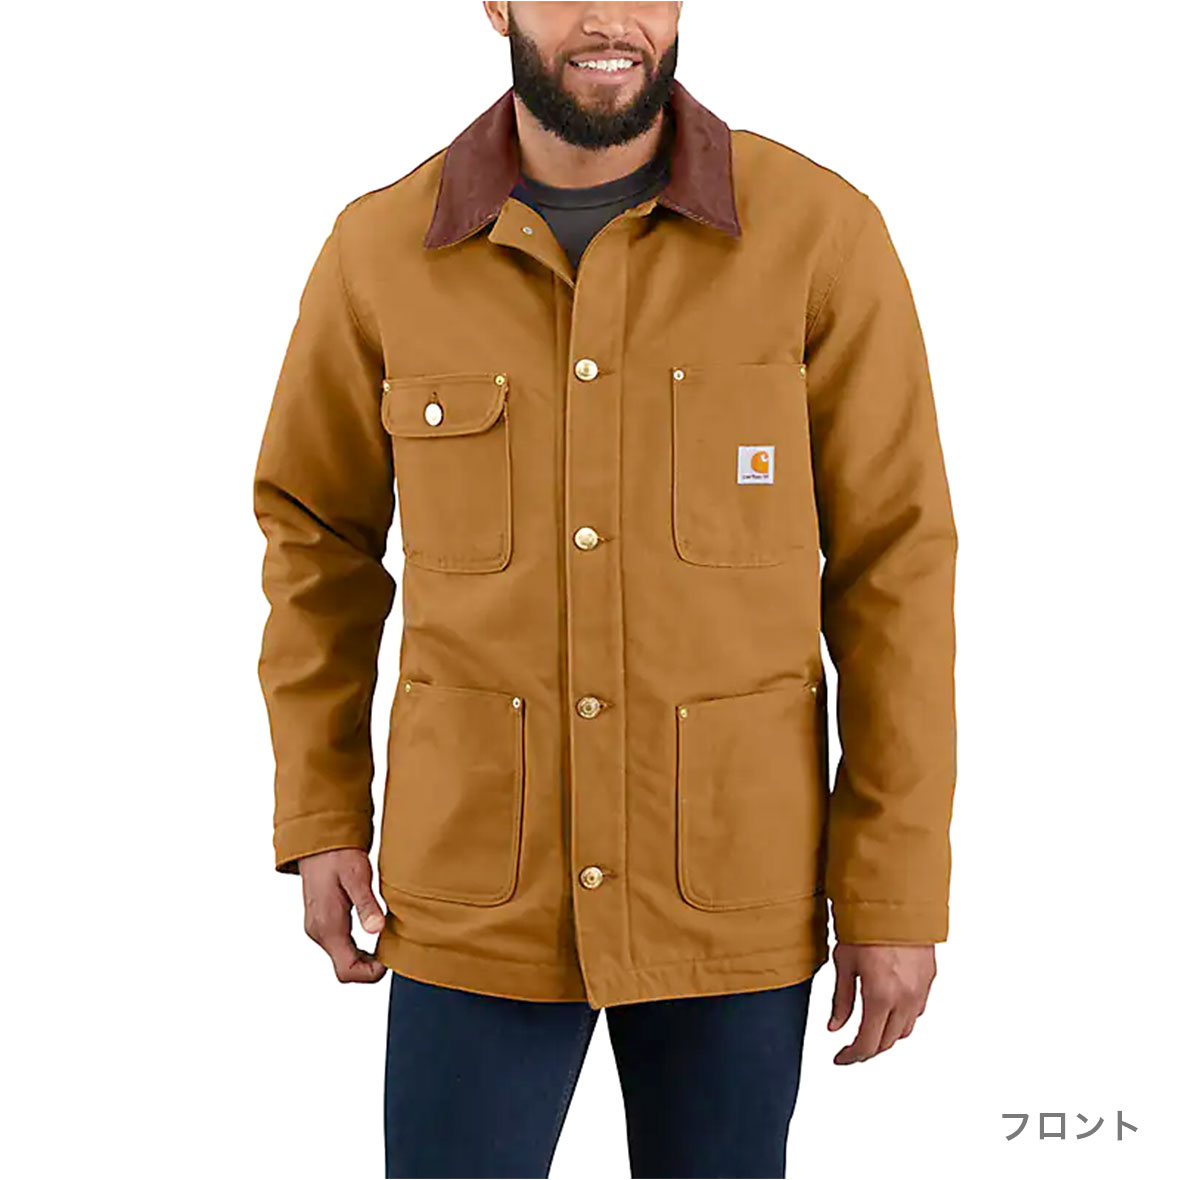 Carhartt カーハート Loose Fit Firm Duck Blanket-Lined Chore Coat (品番103825US)